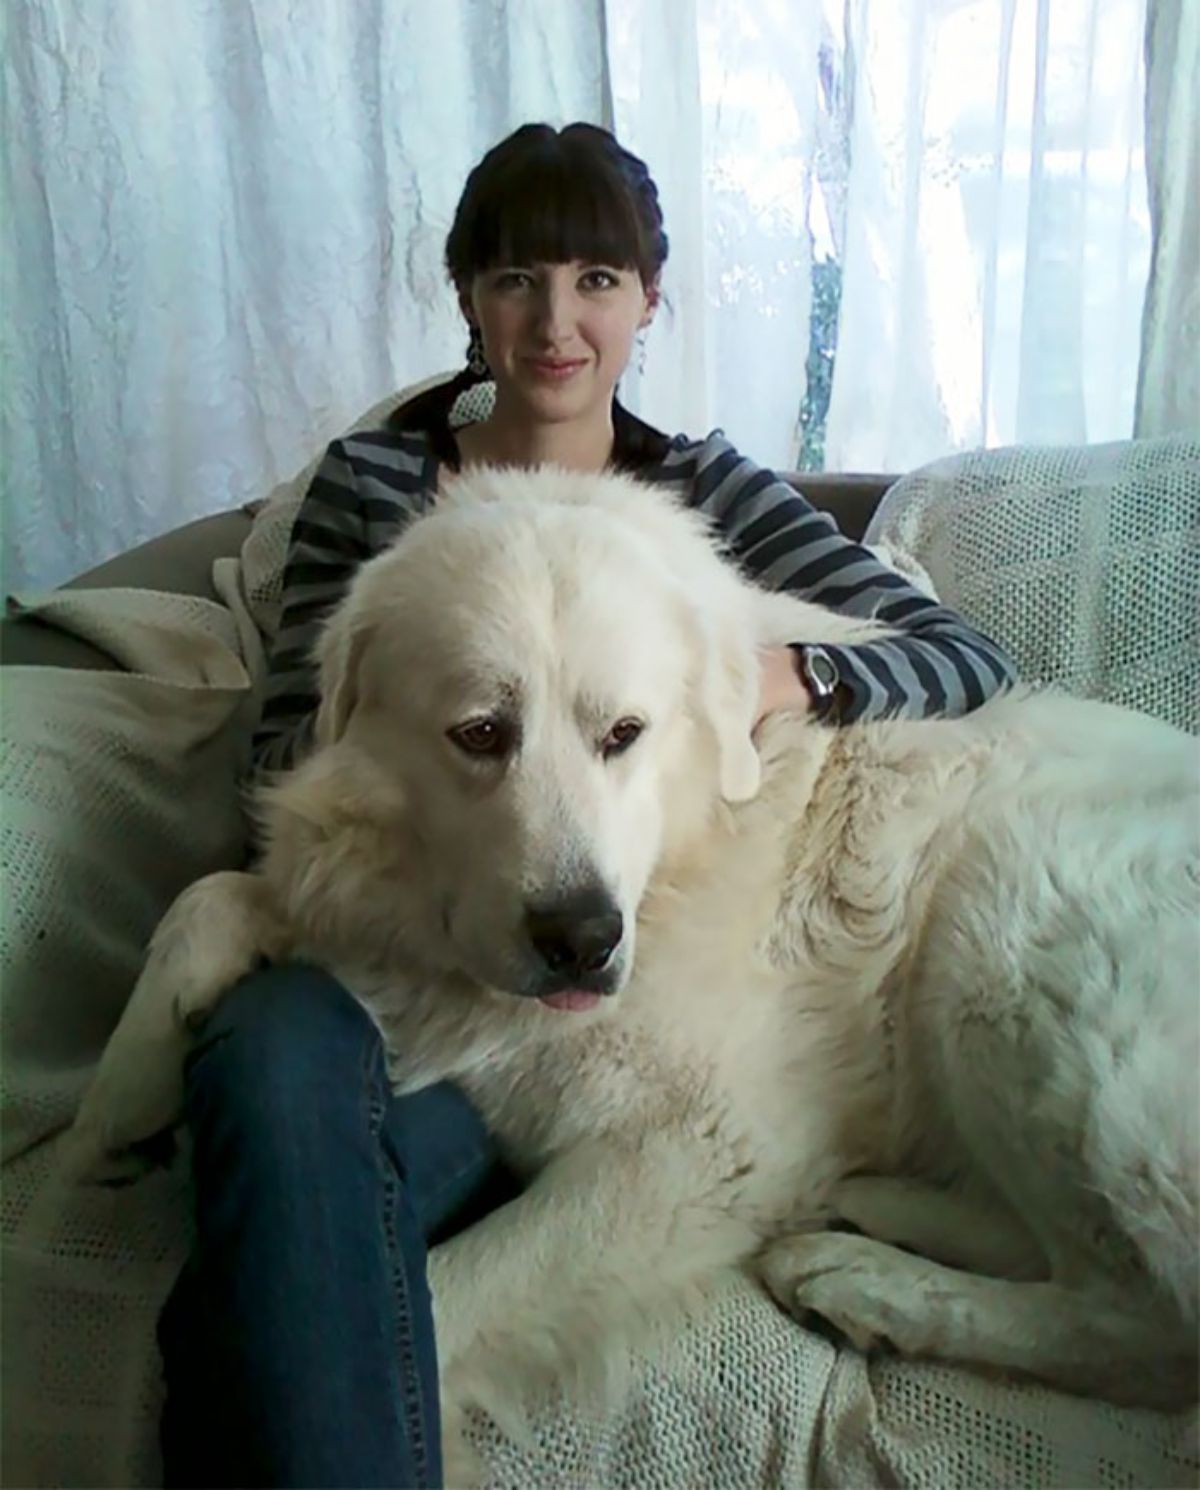 fluffy white great pyrenees laying on a woman's lap